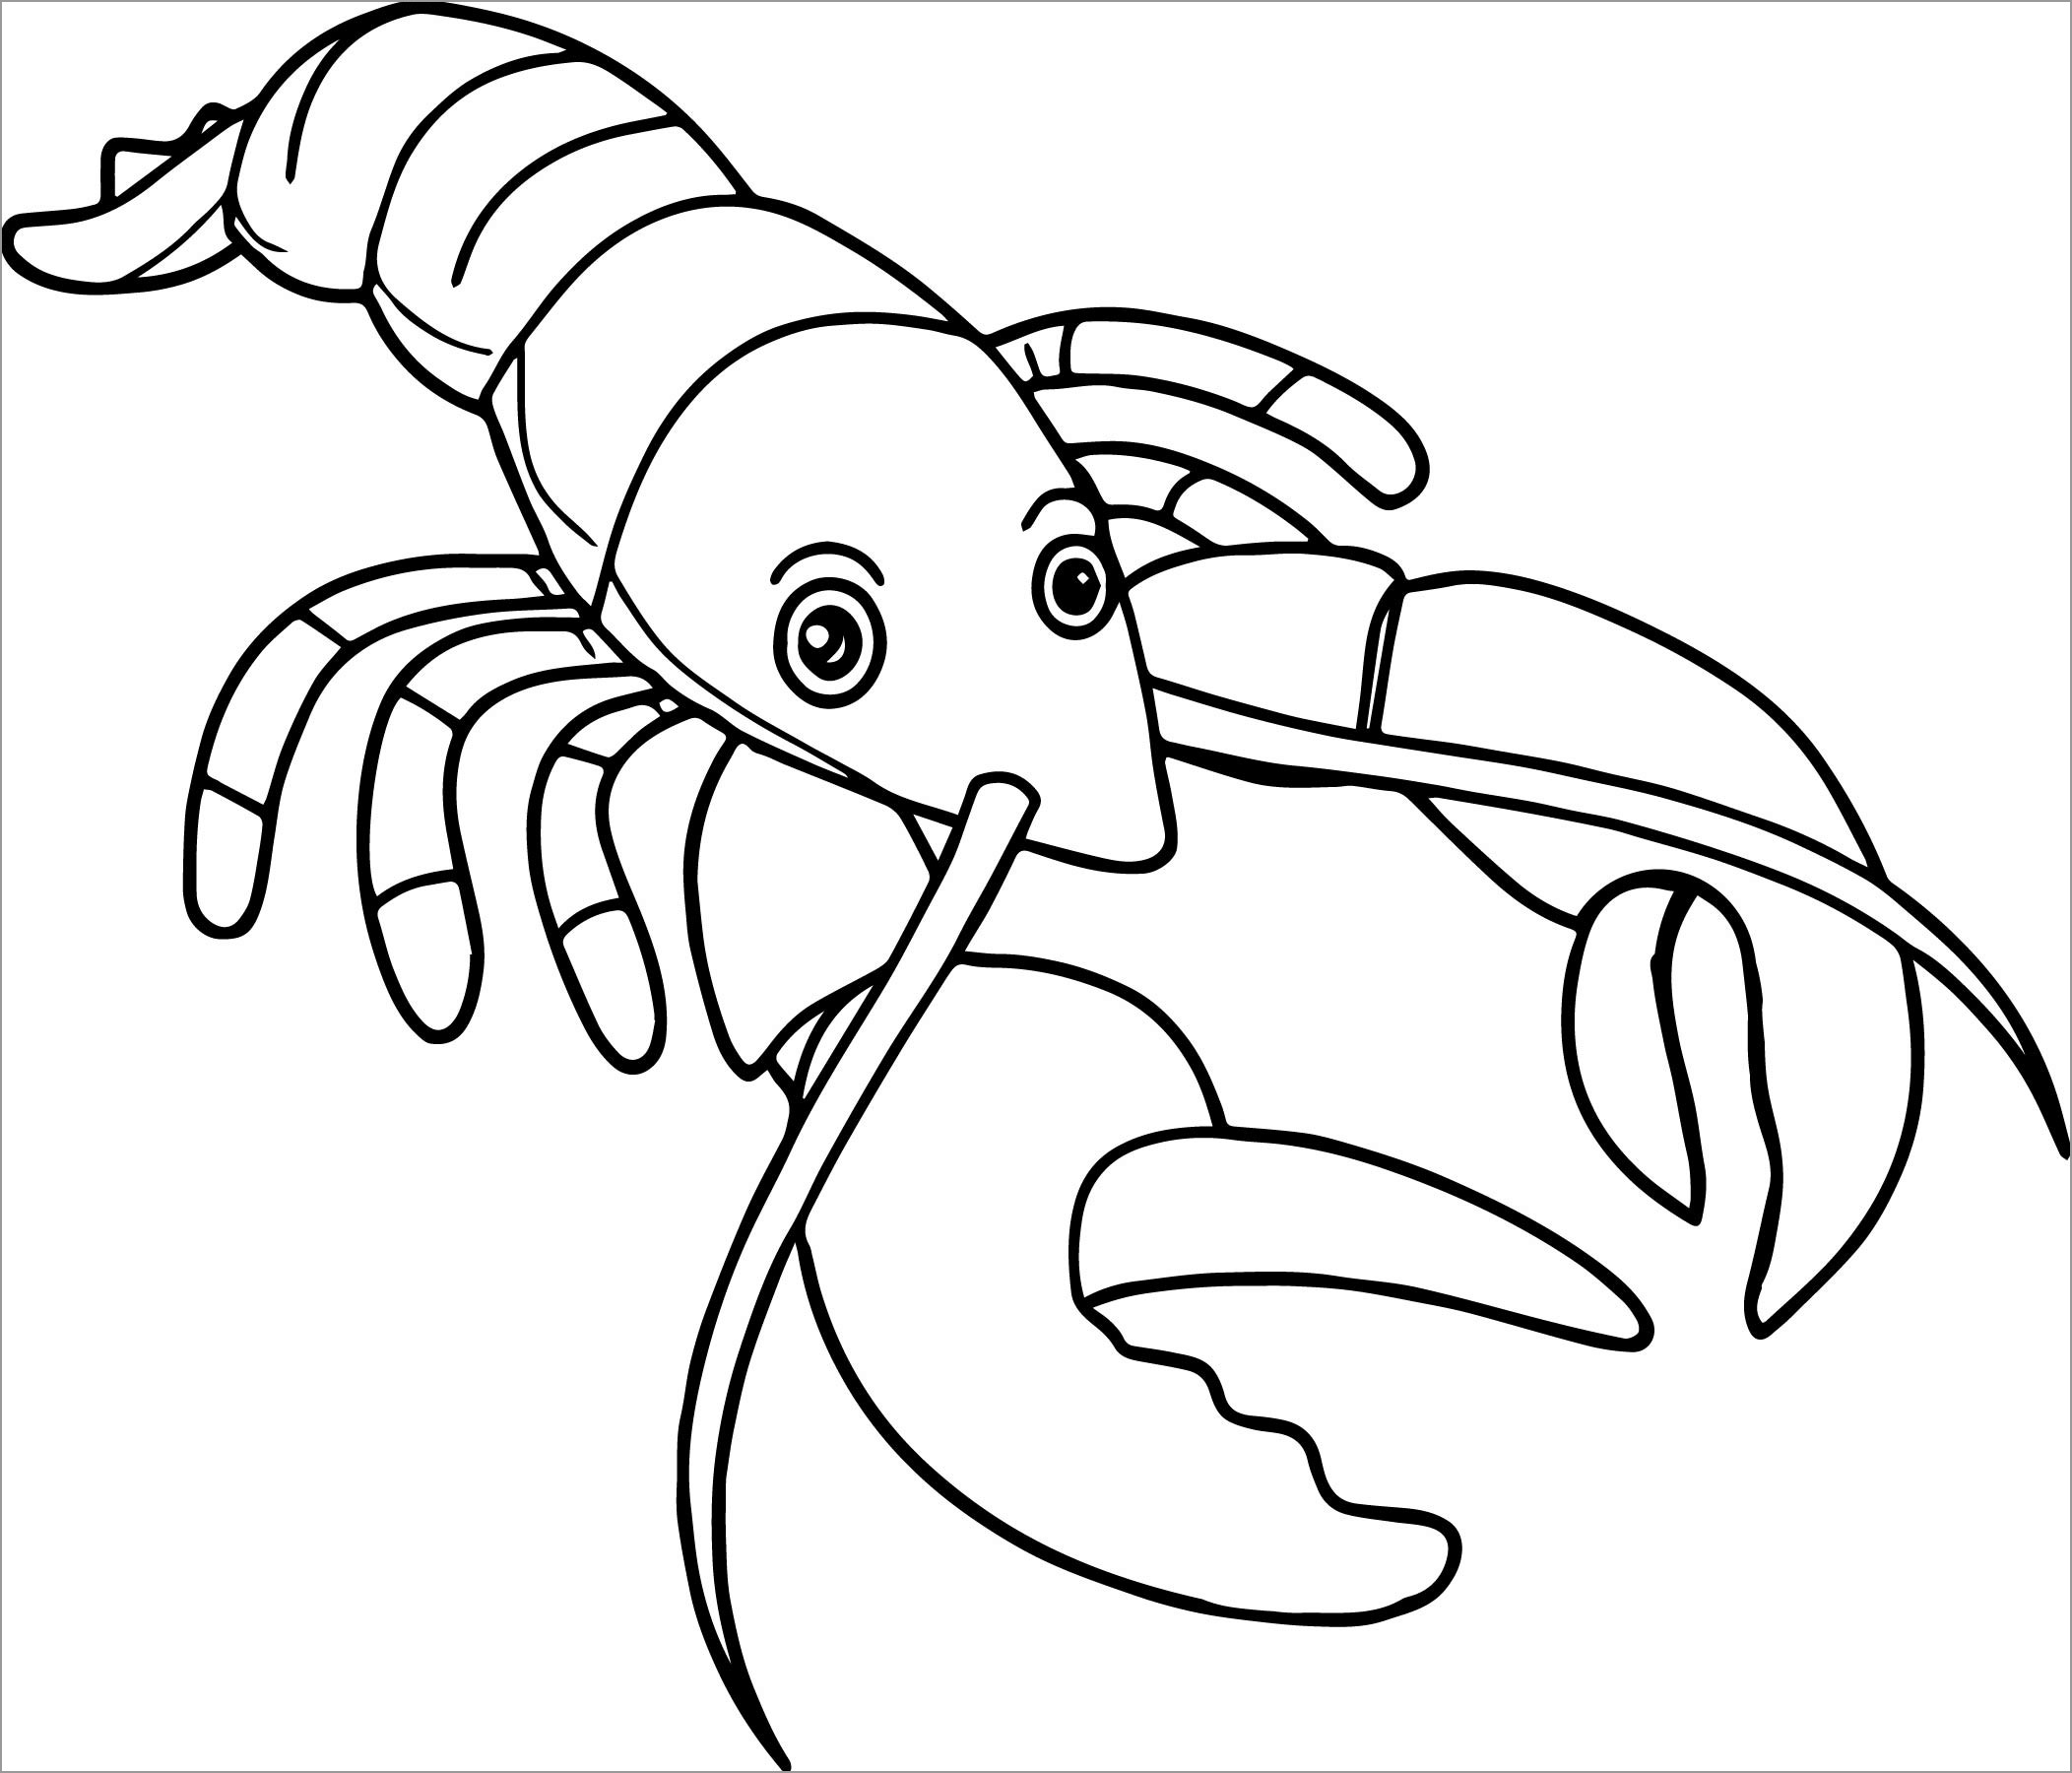 Coloring Page Of A Lobster ColoringBay